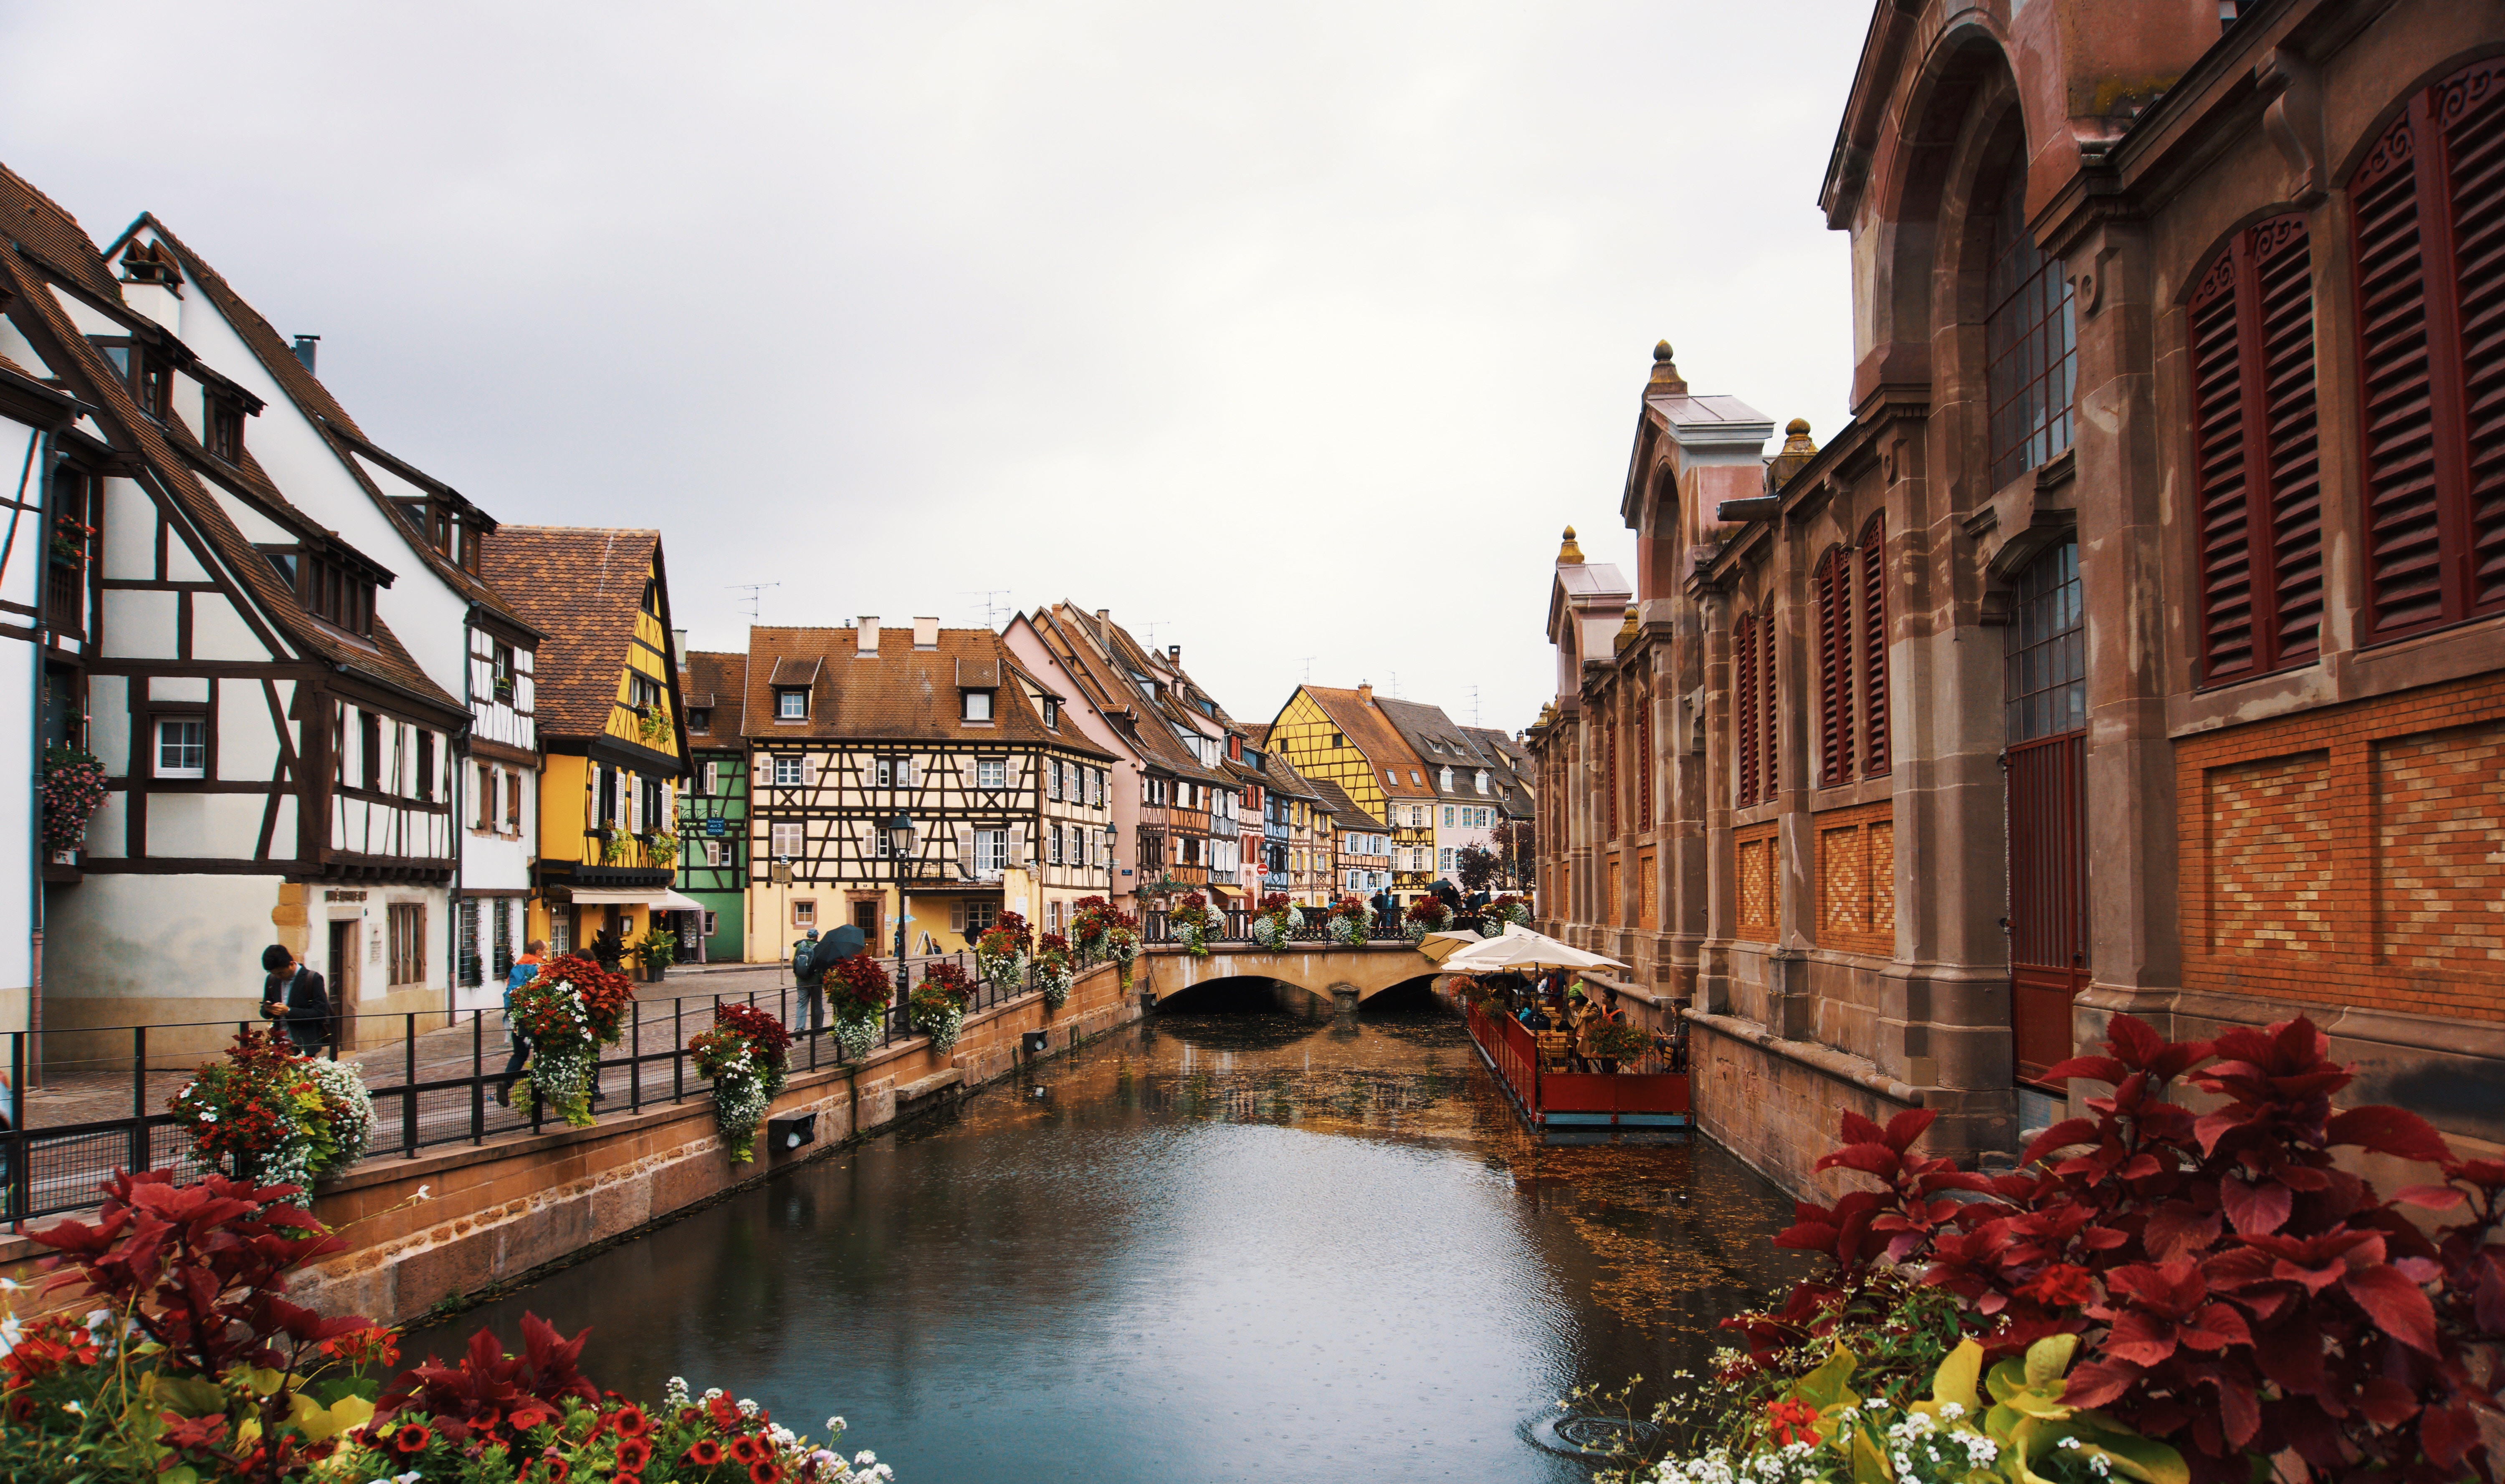 Picturesque Canals in the Fairy Tale Town of Colmar. Photo courtesy of Sascha Sturm on Unsplash.